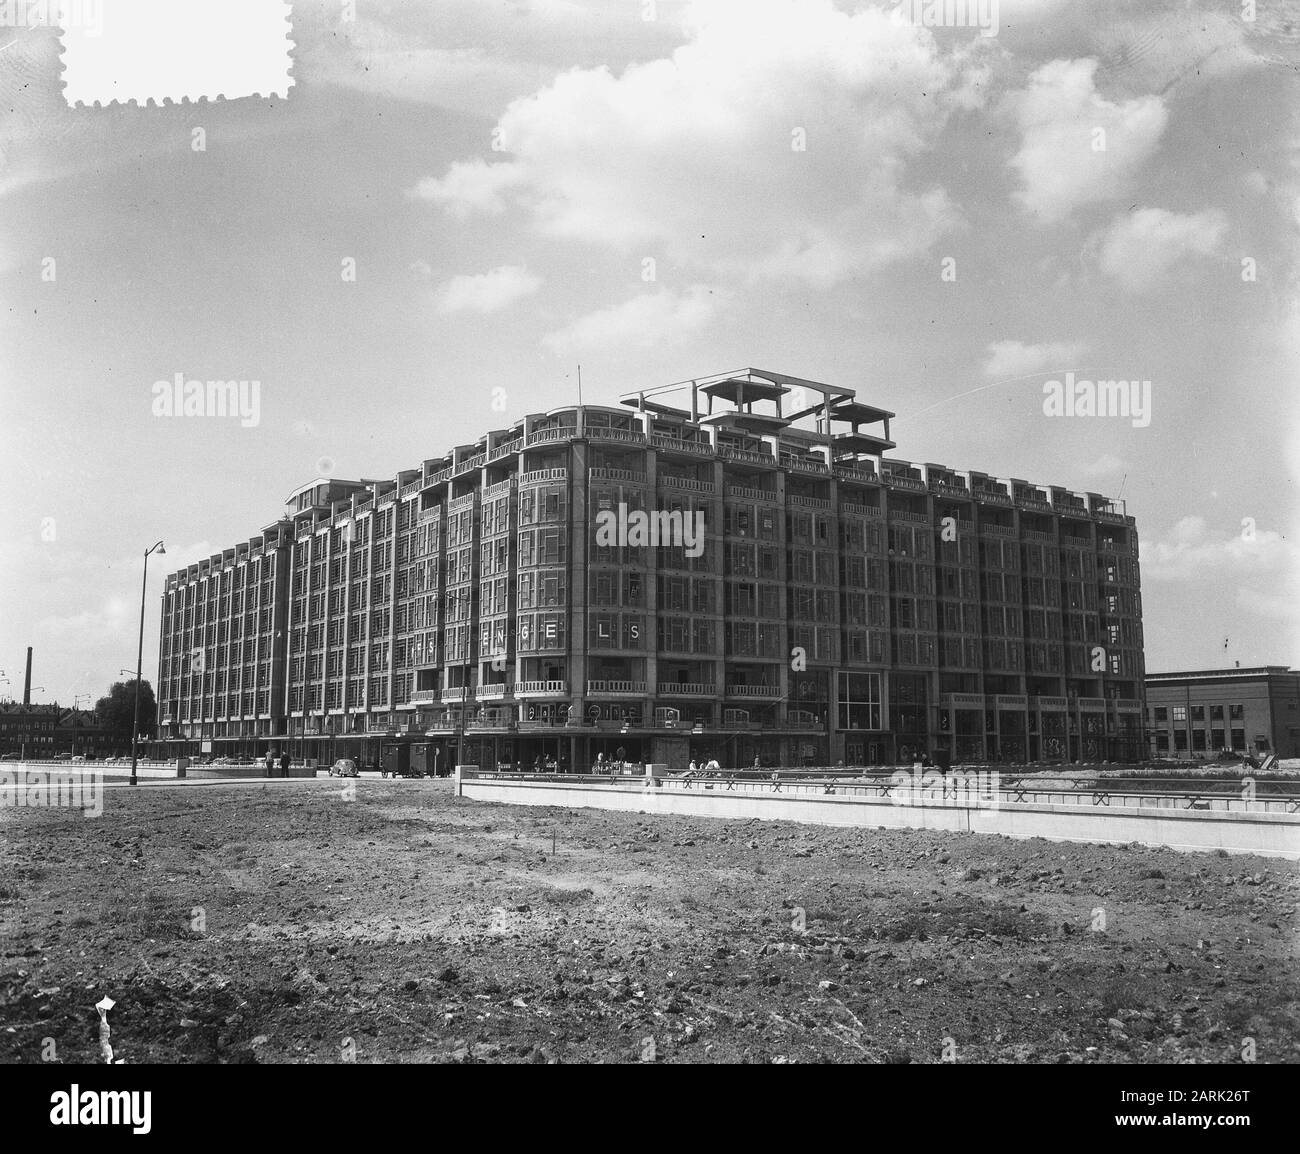 Het Groothandelsgebouw in Rotterdam Annotation: The architects are Huig A. Maaskant and Willem van Tijen Date: 5 June 1952 Location: Rotterdam, Zuid-Holland Keywords: wholesale buildings, office buildings Stock Photo